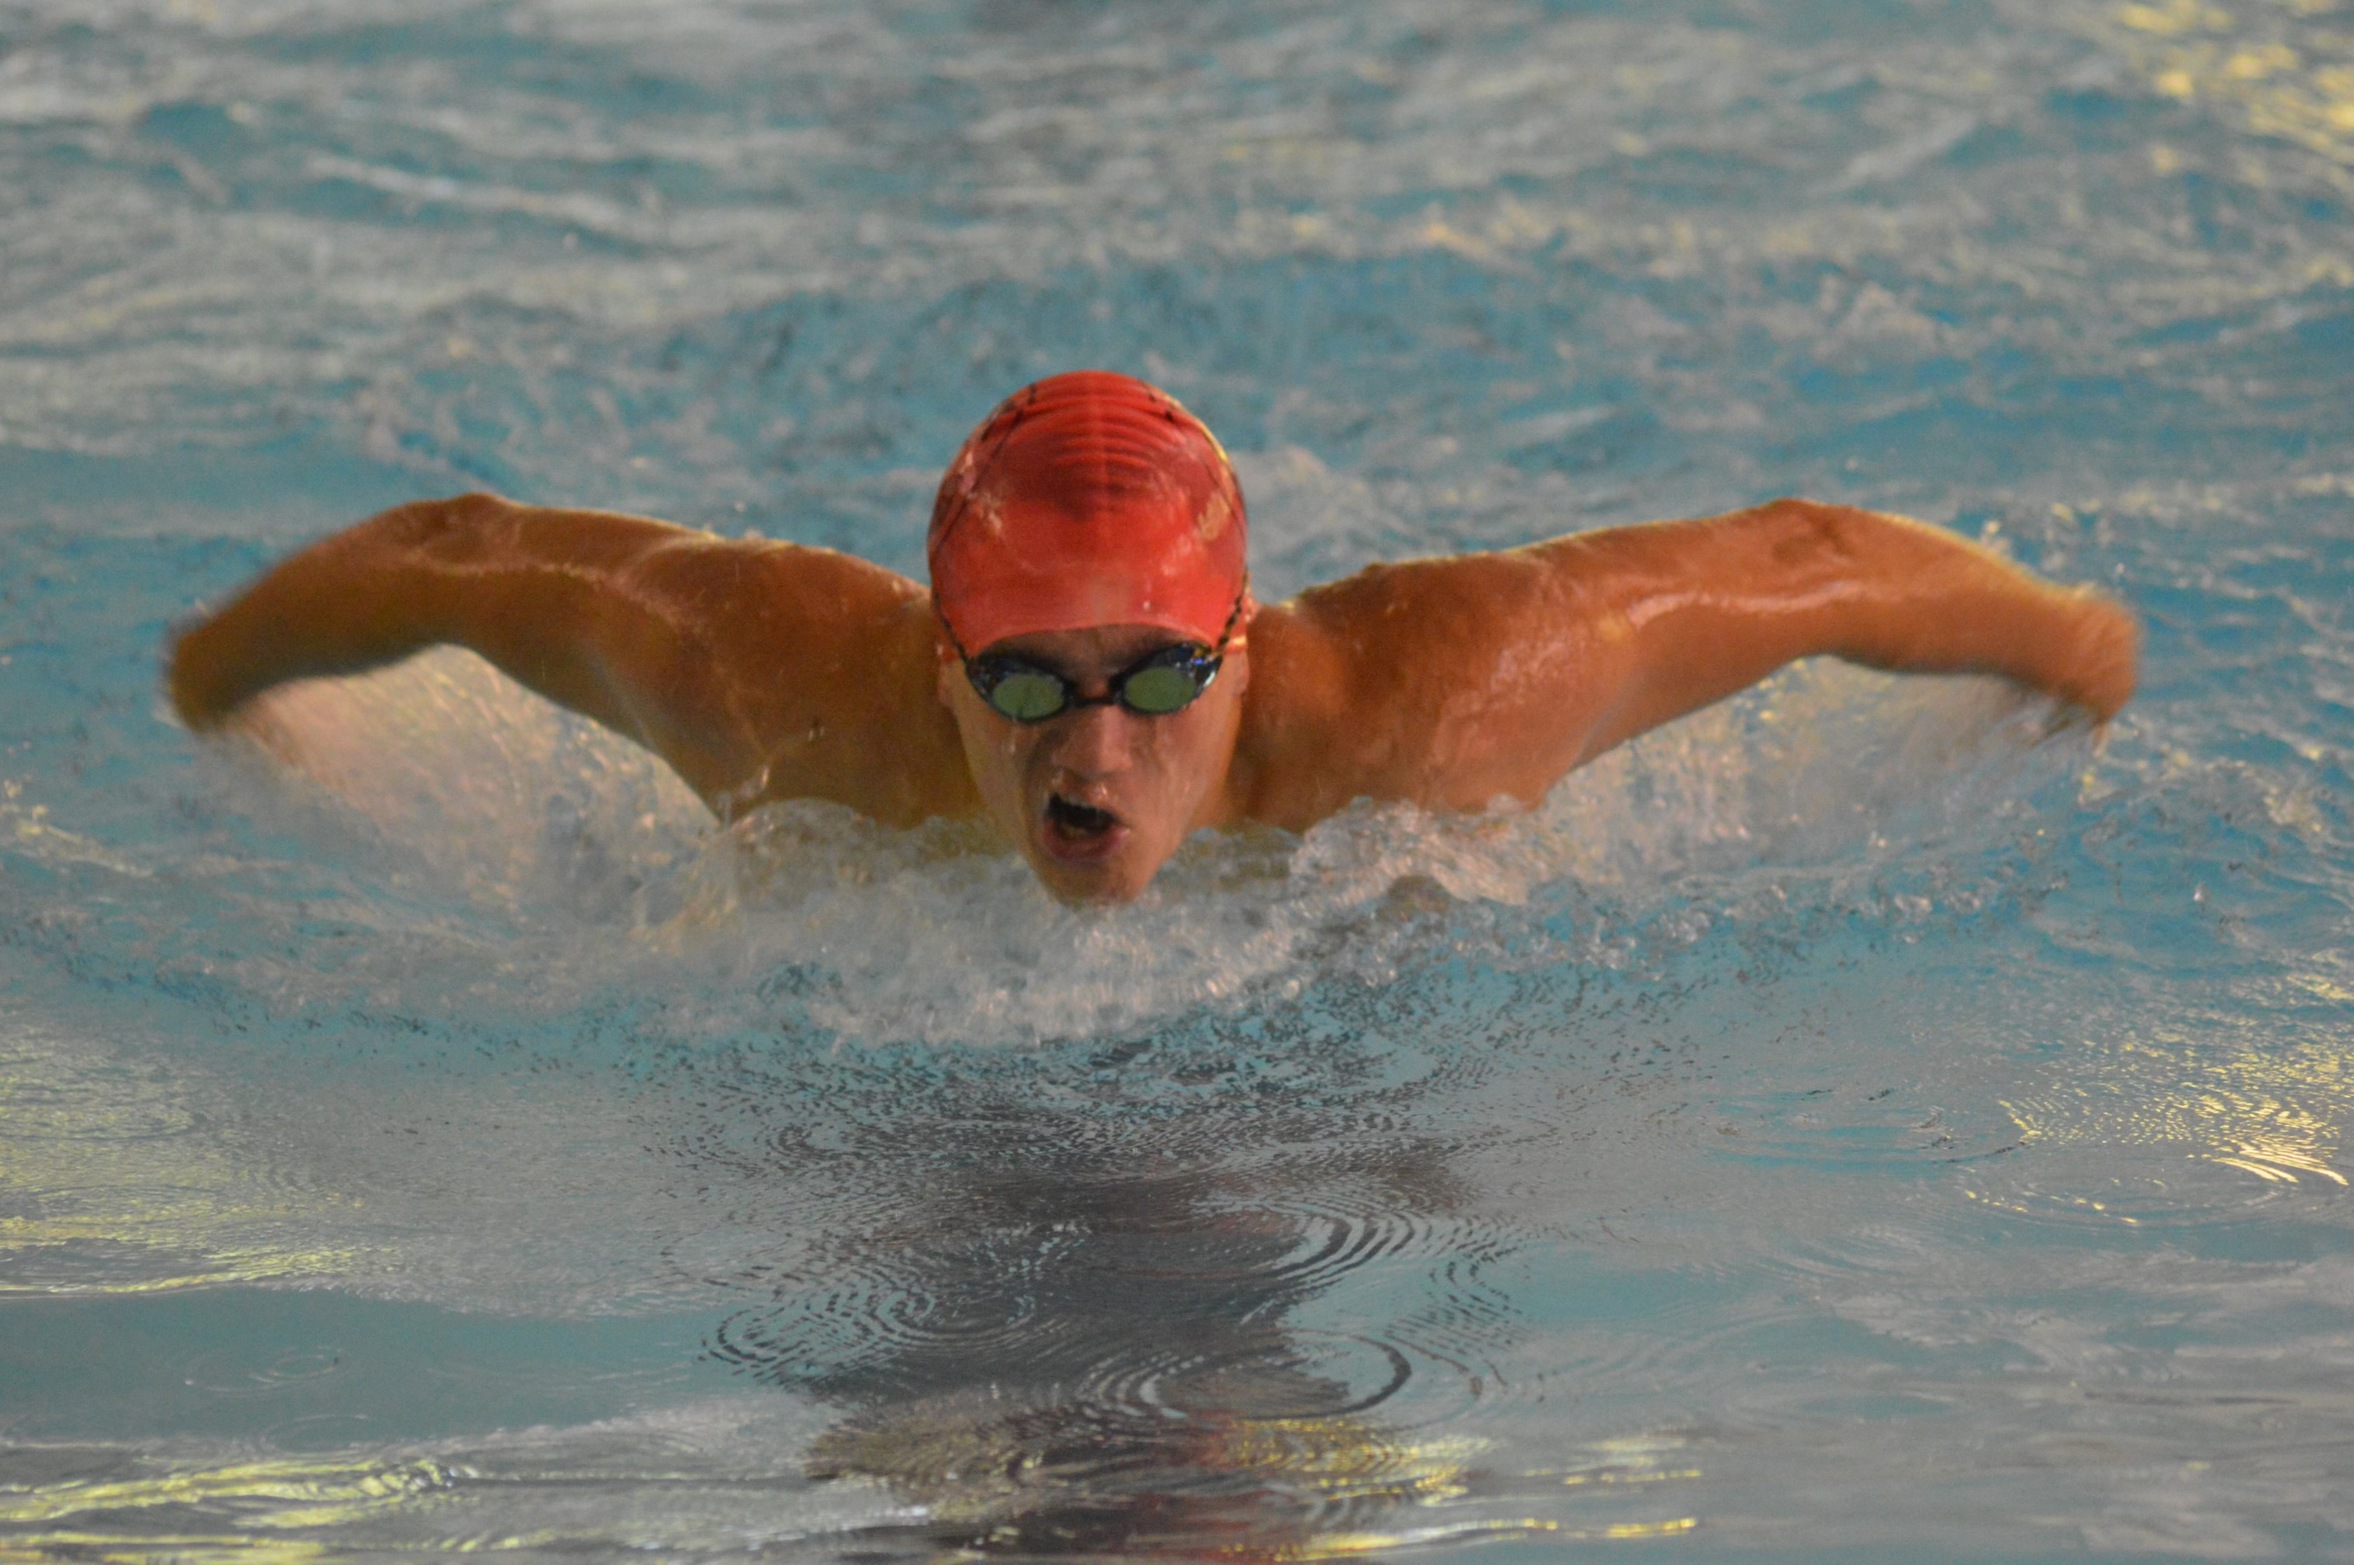 Tony Barbee swam a season-best time in the 100 free for another individual win on Saturday.